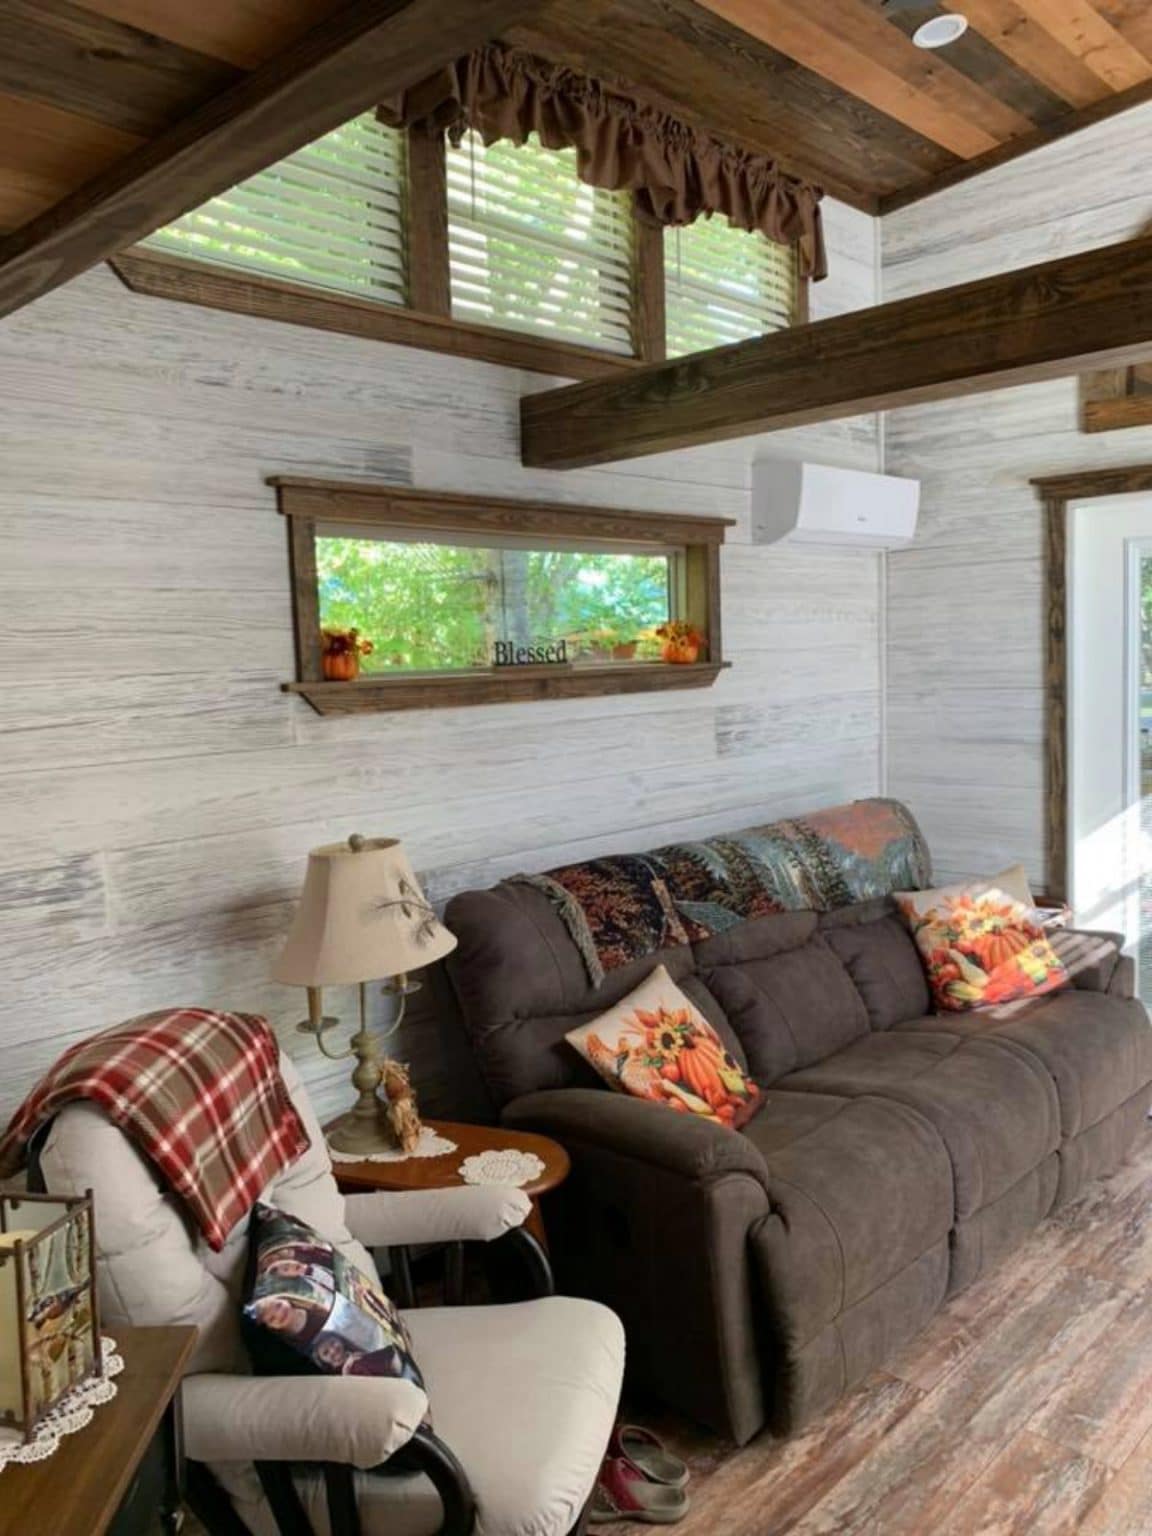 This Rustic Tiny Cabin is Beautifully Decorated by Its New Owners